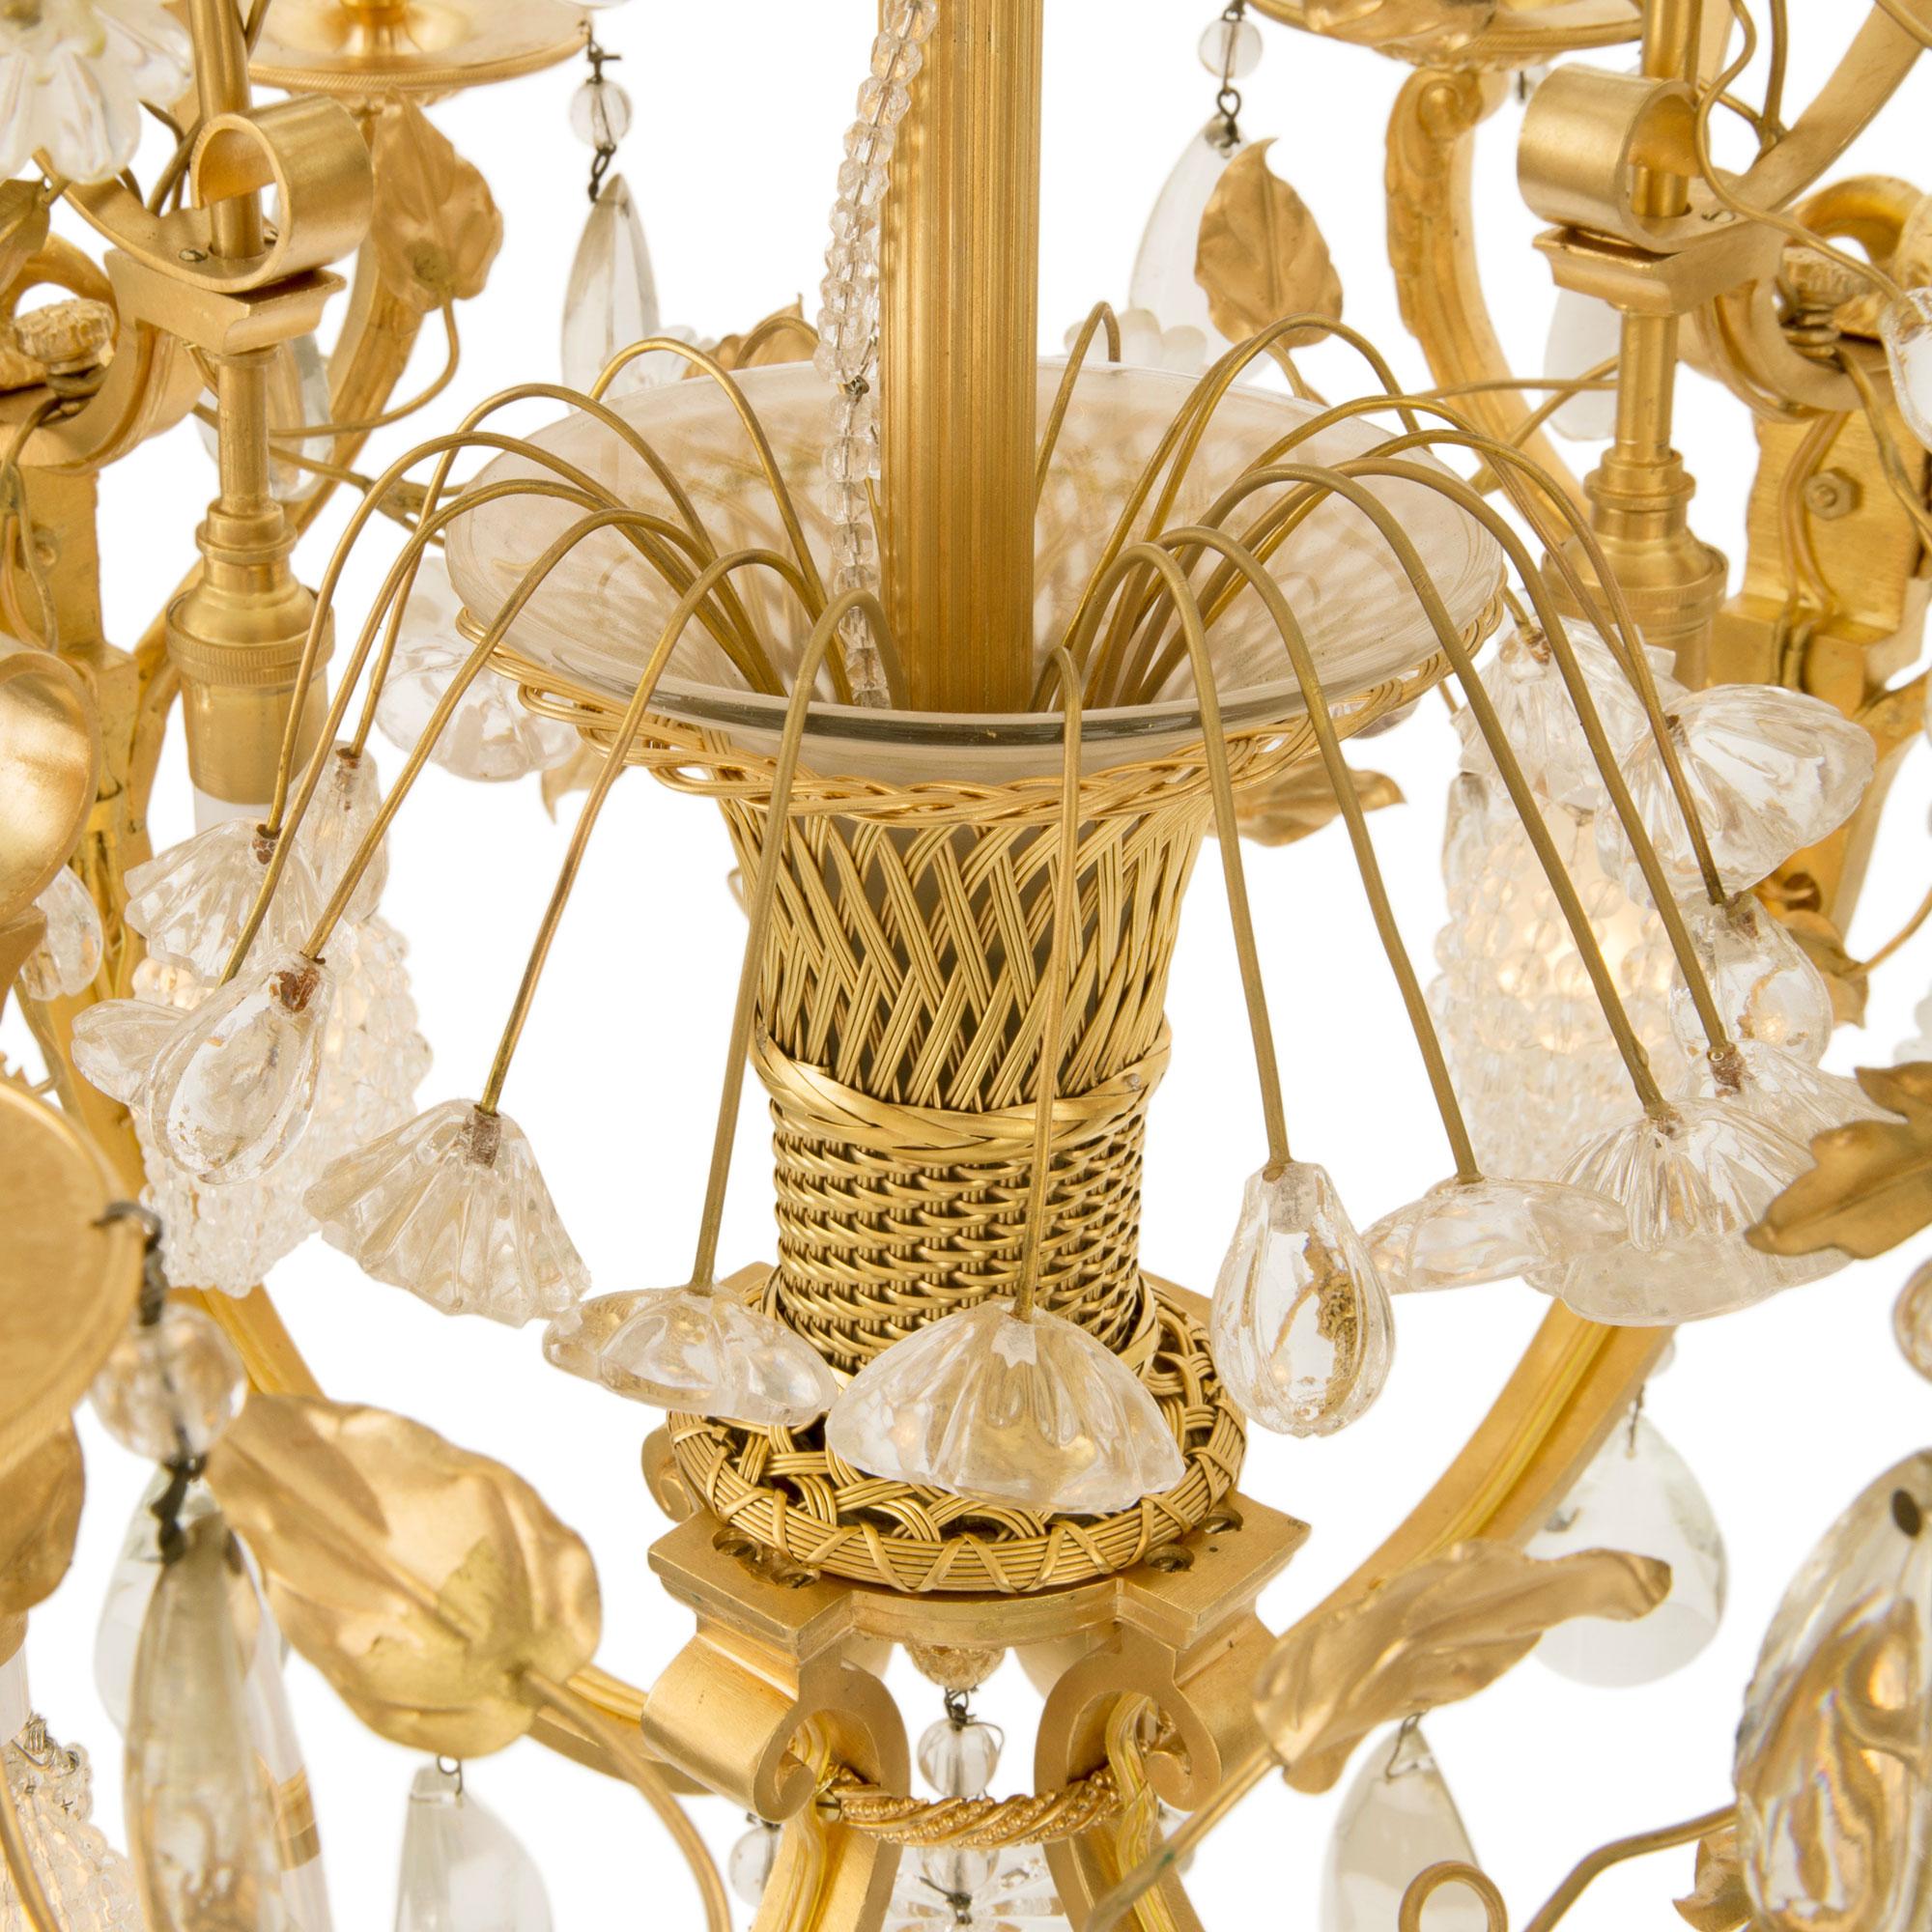 French 19th Century Belle Époque Period Ormolu and Baccarat Crystal Chandelier For Sale 2